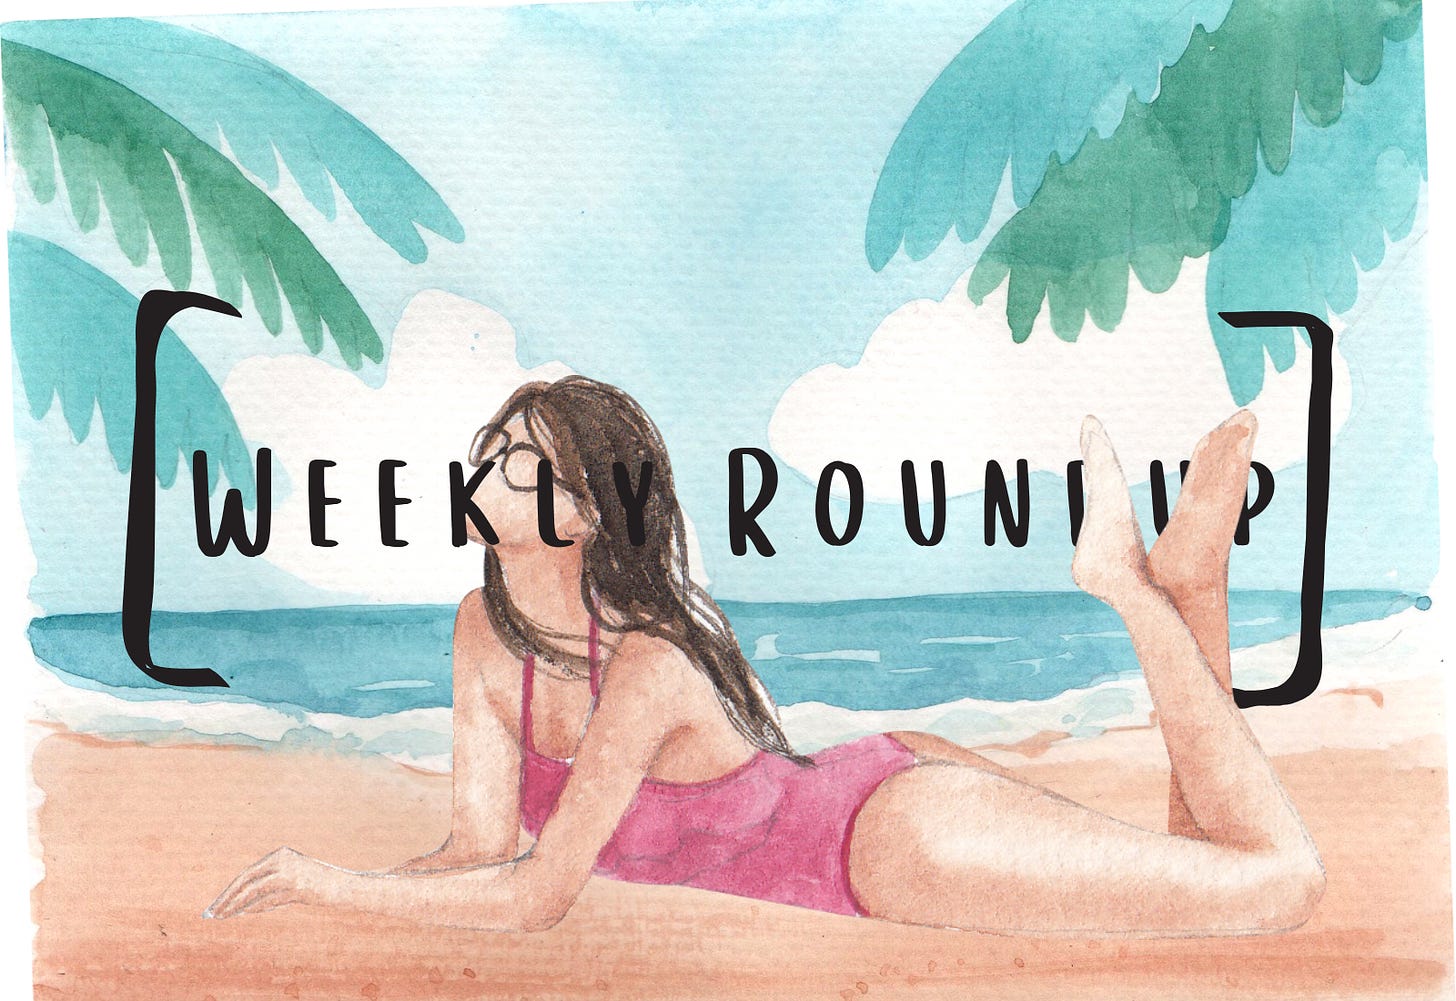 Image is a watercolor painting of a beach and a woman lying there. Text overlay reads "Weekly Roundup."